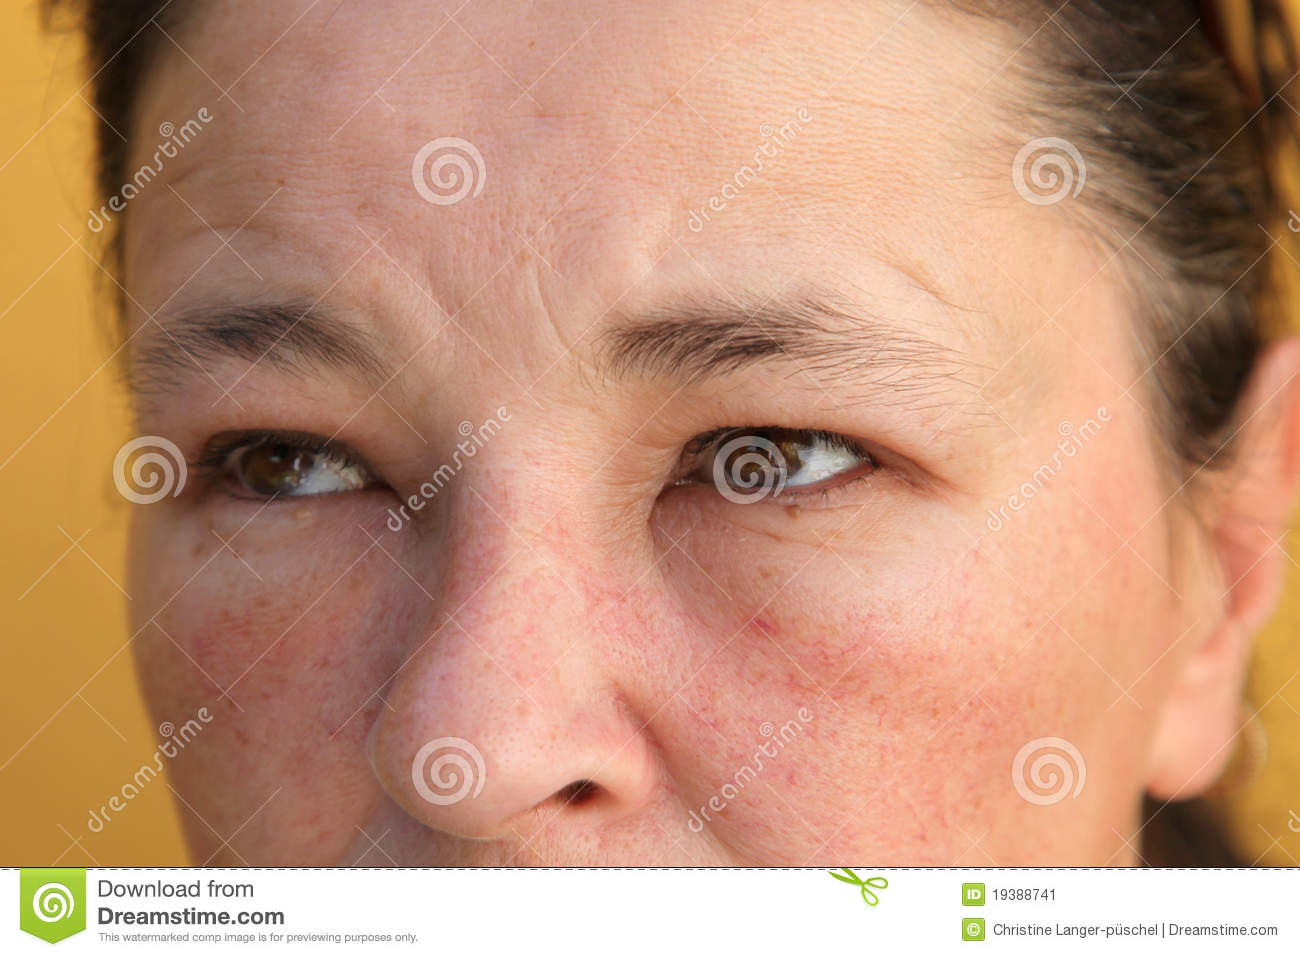 Stock Image  Allergies   Swollen Eyes And Face